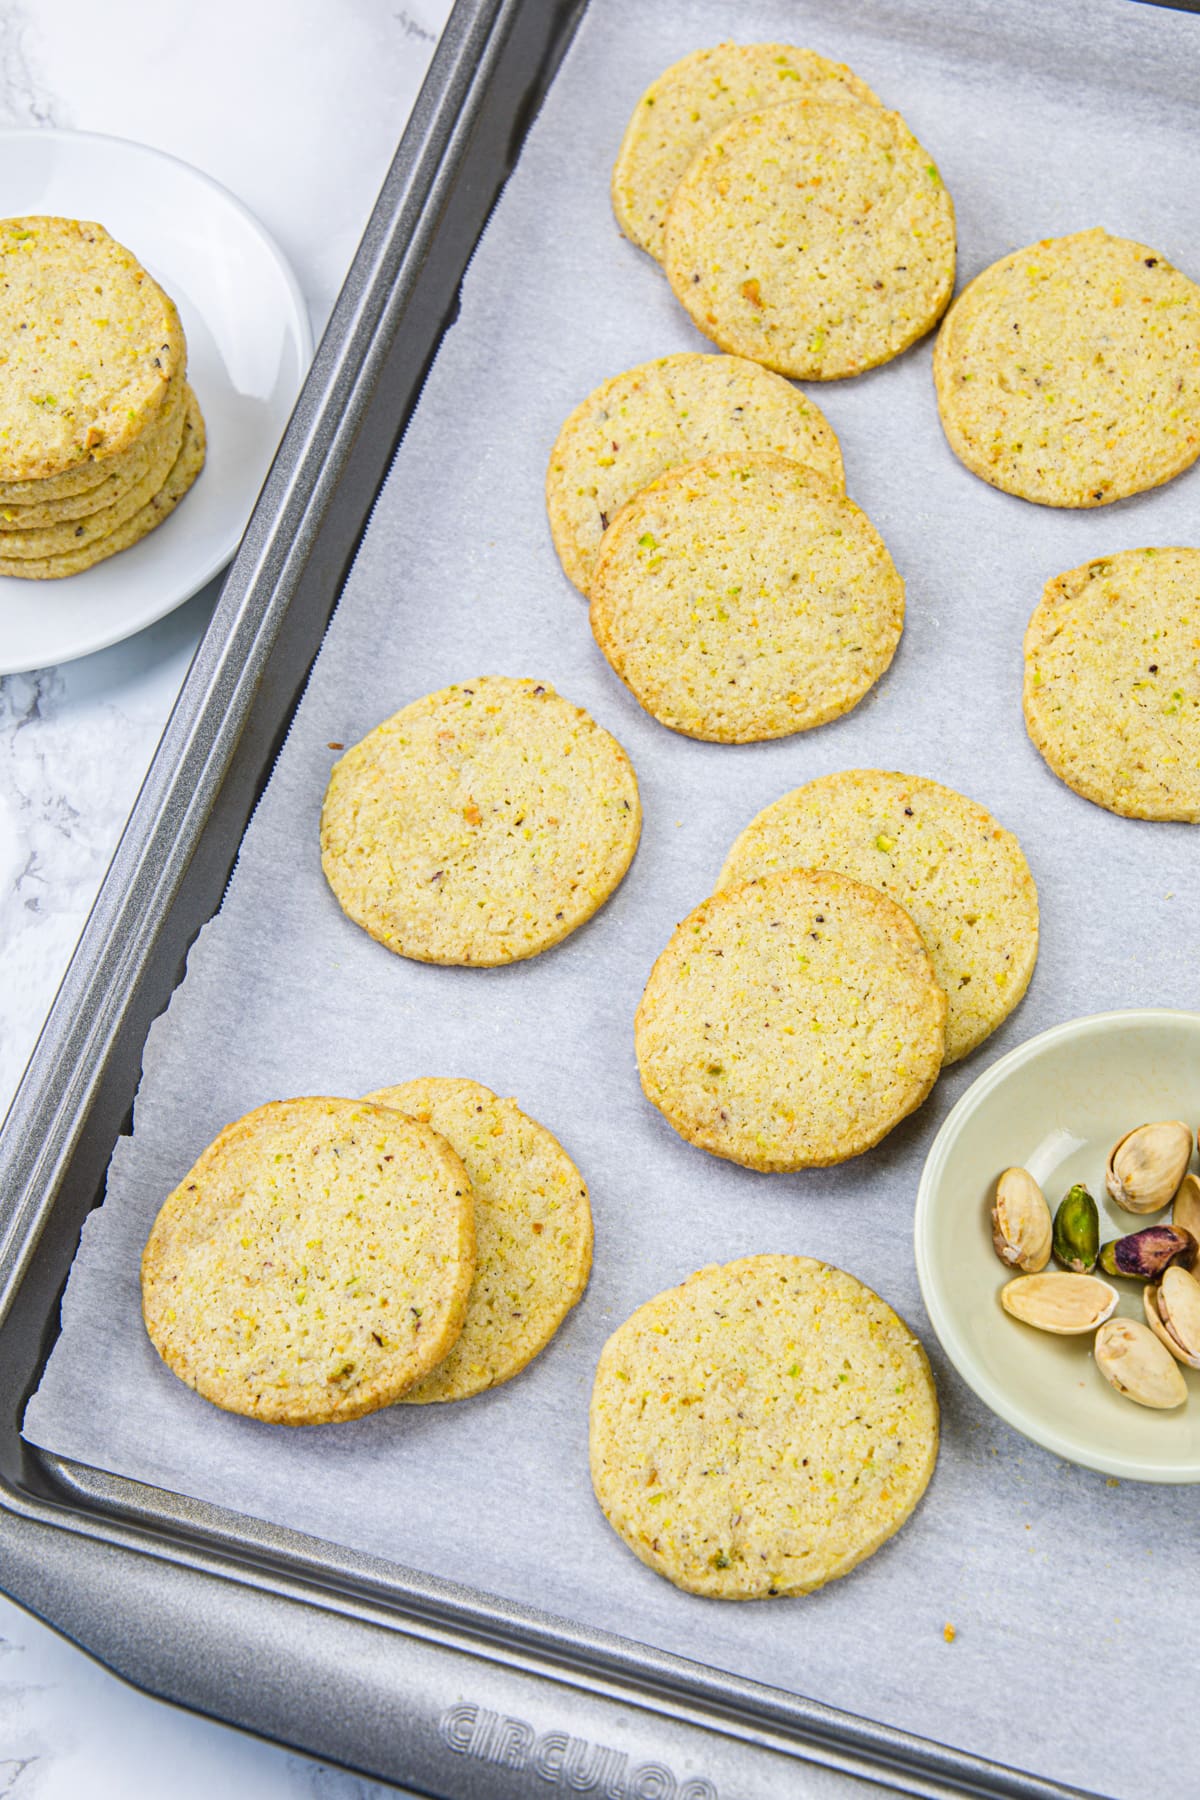 Pistachio cookies in a tray with pistachios on the side.